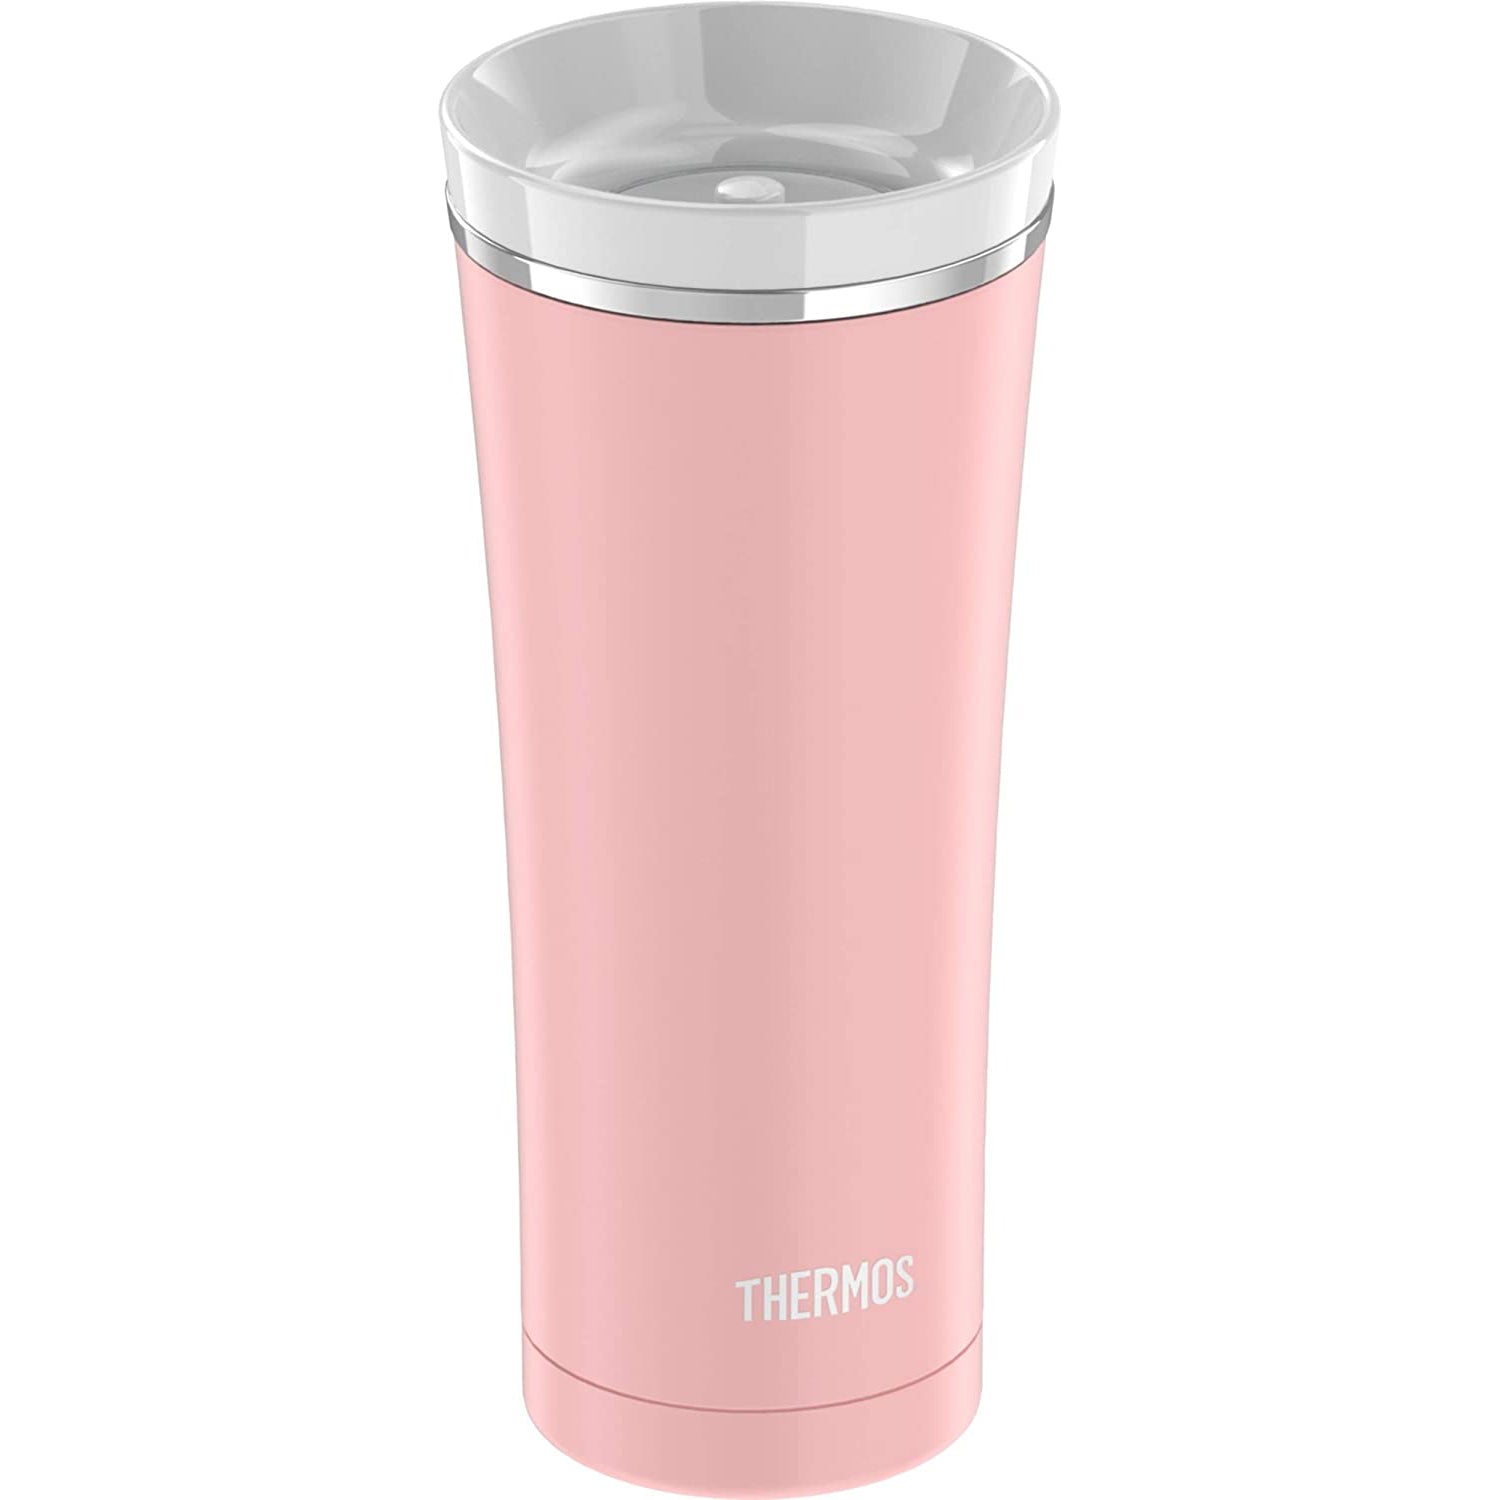 Thermos Sipp 16 Ounce (470 ml) Stainless Steel Travel Tumbler Matte Pink